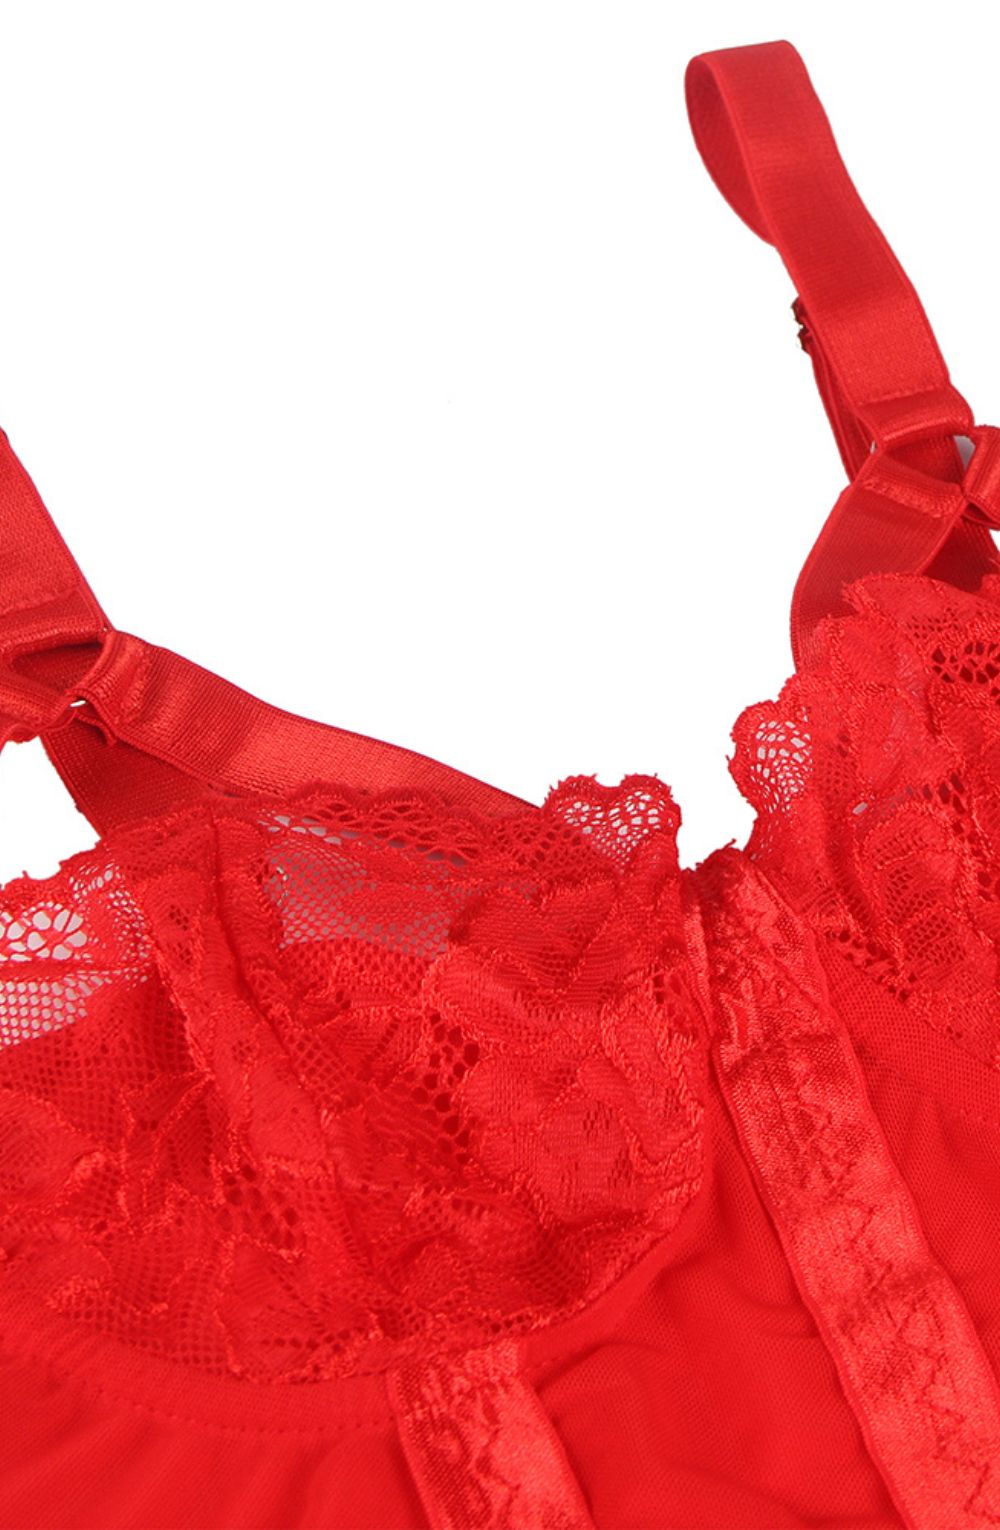 YesX YX858 Elegant Red Lace Bodysuit with Adjustable Straps & Underwired Cups